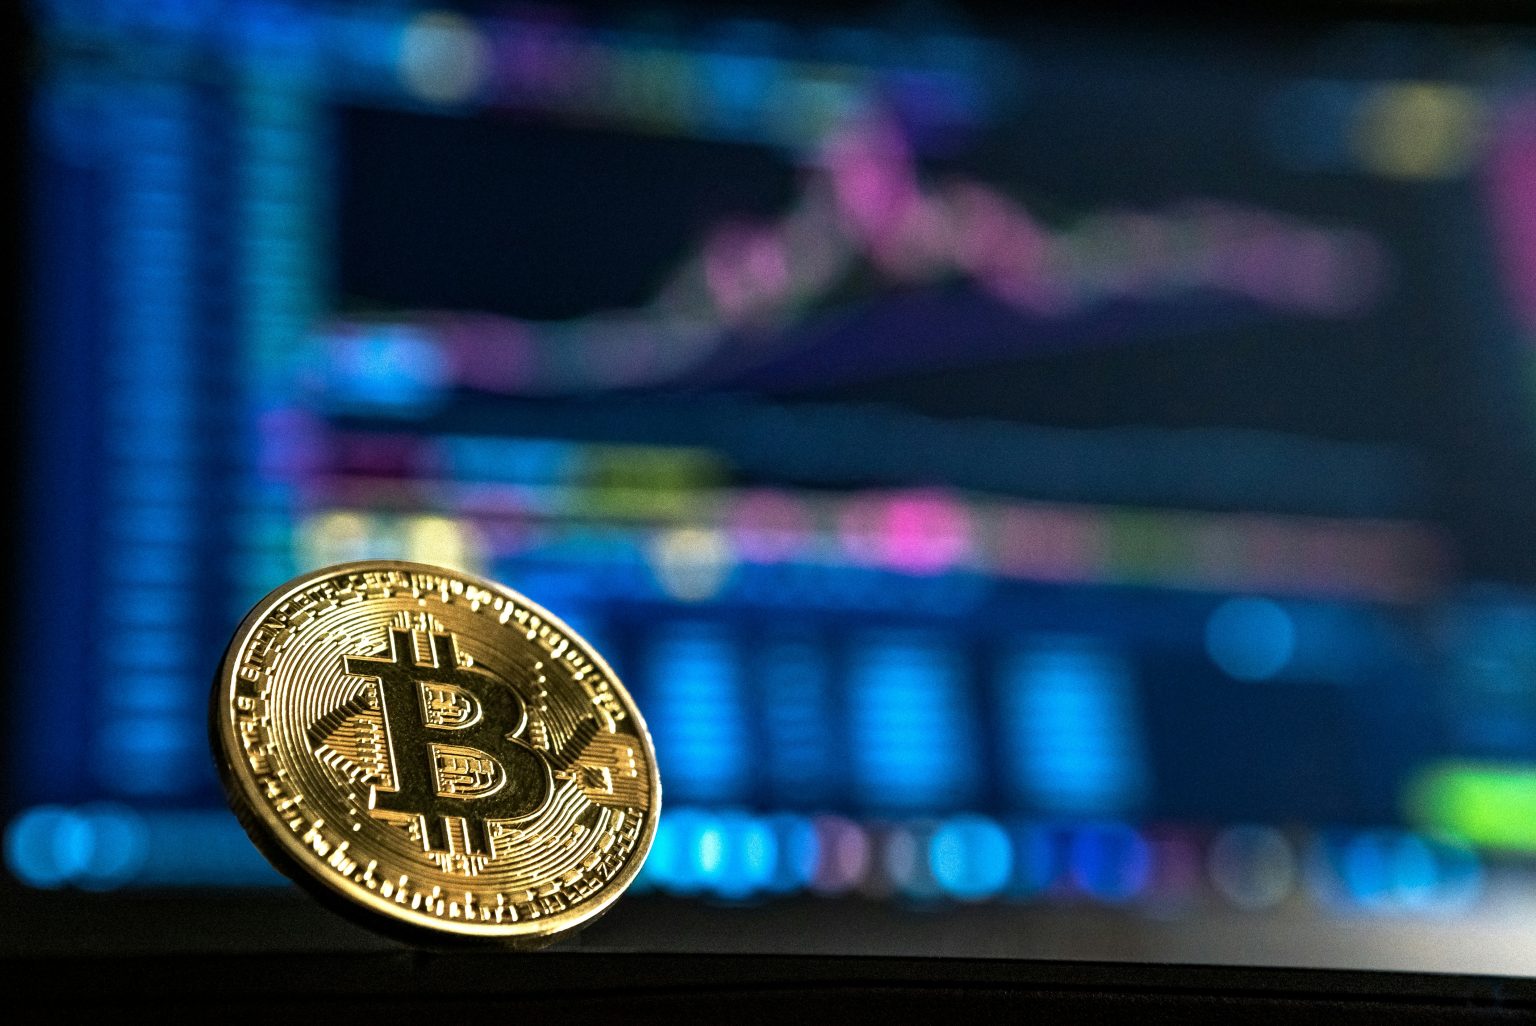 Bitcoin Price | Surpassing €55,000 for the First Time Since 2021